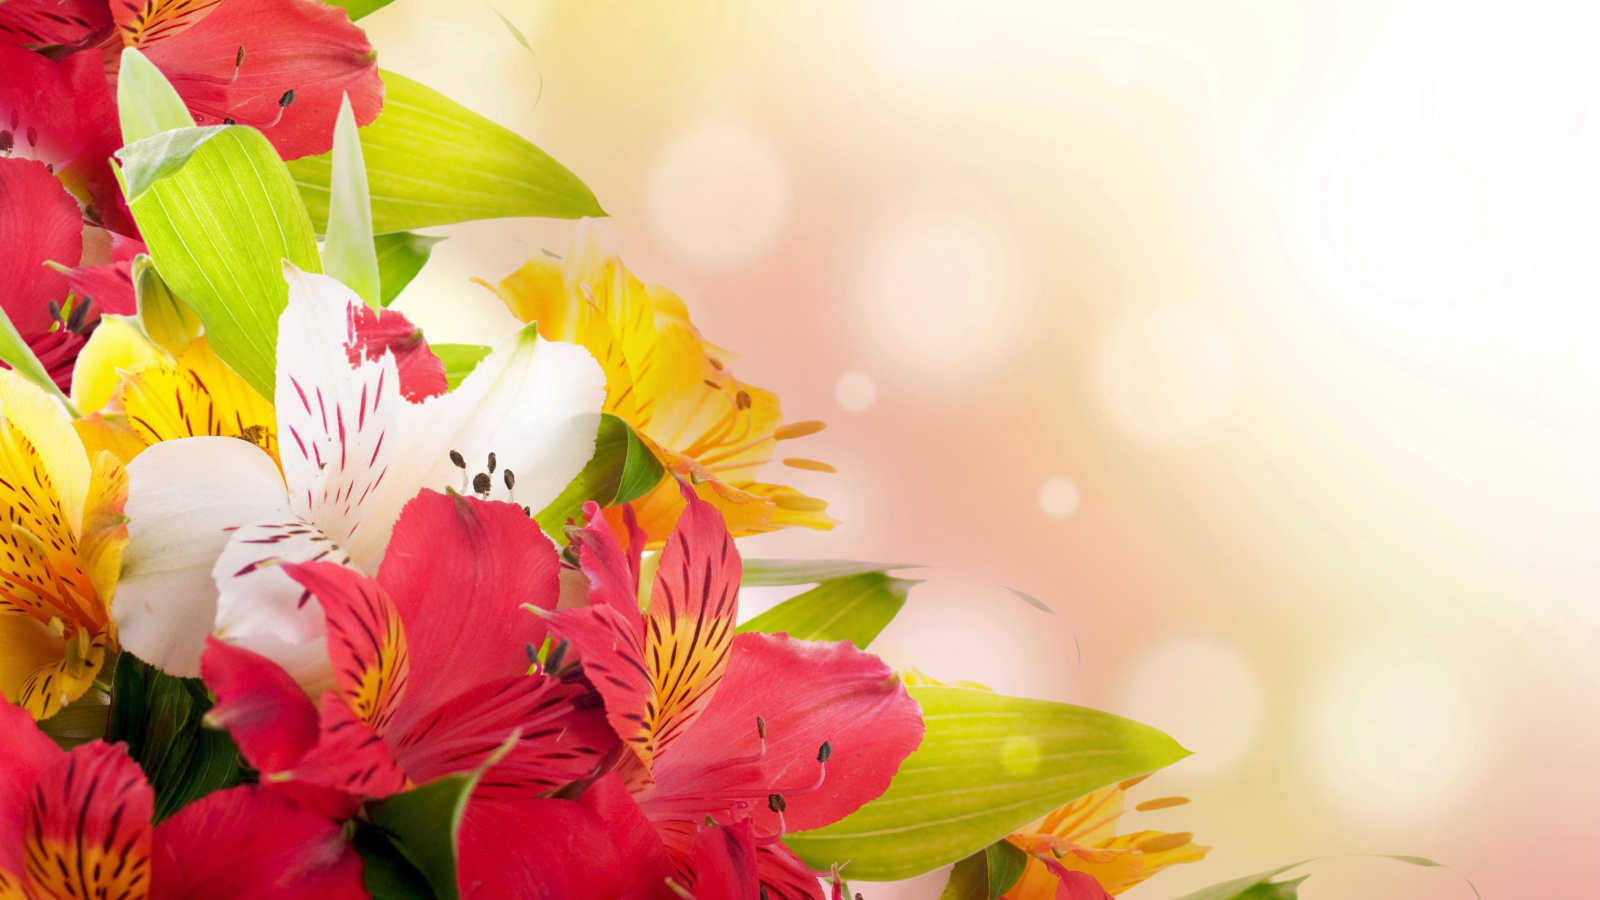 Flowers for the holiday of March 8 wallpaper 1600x900